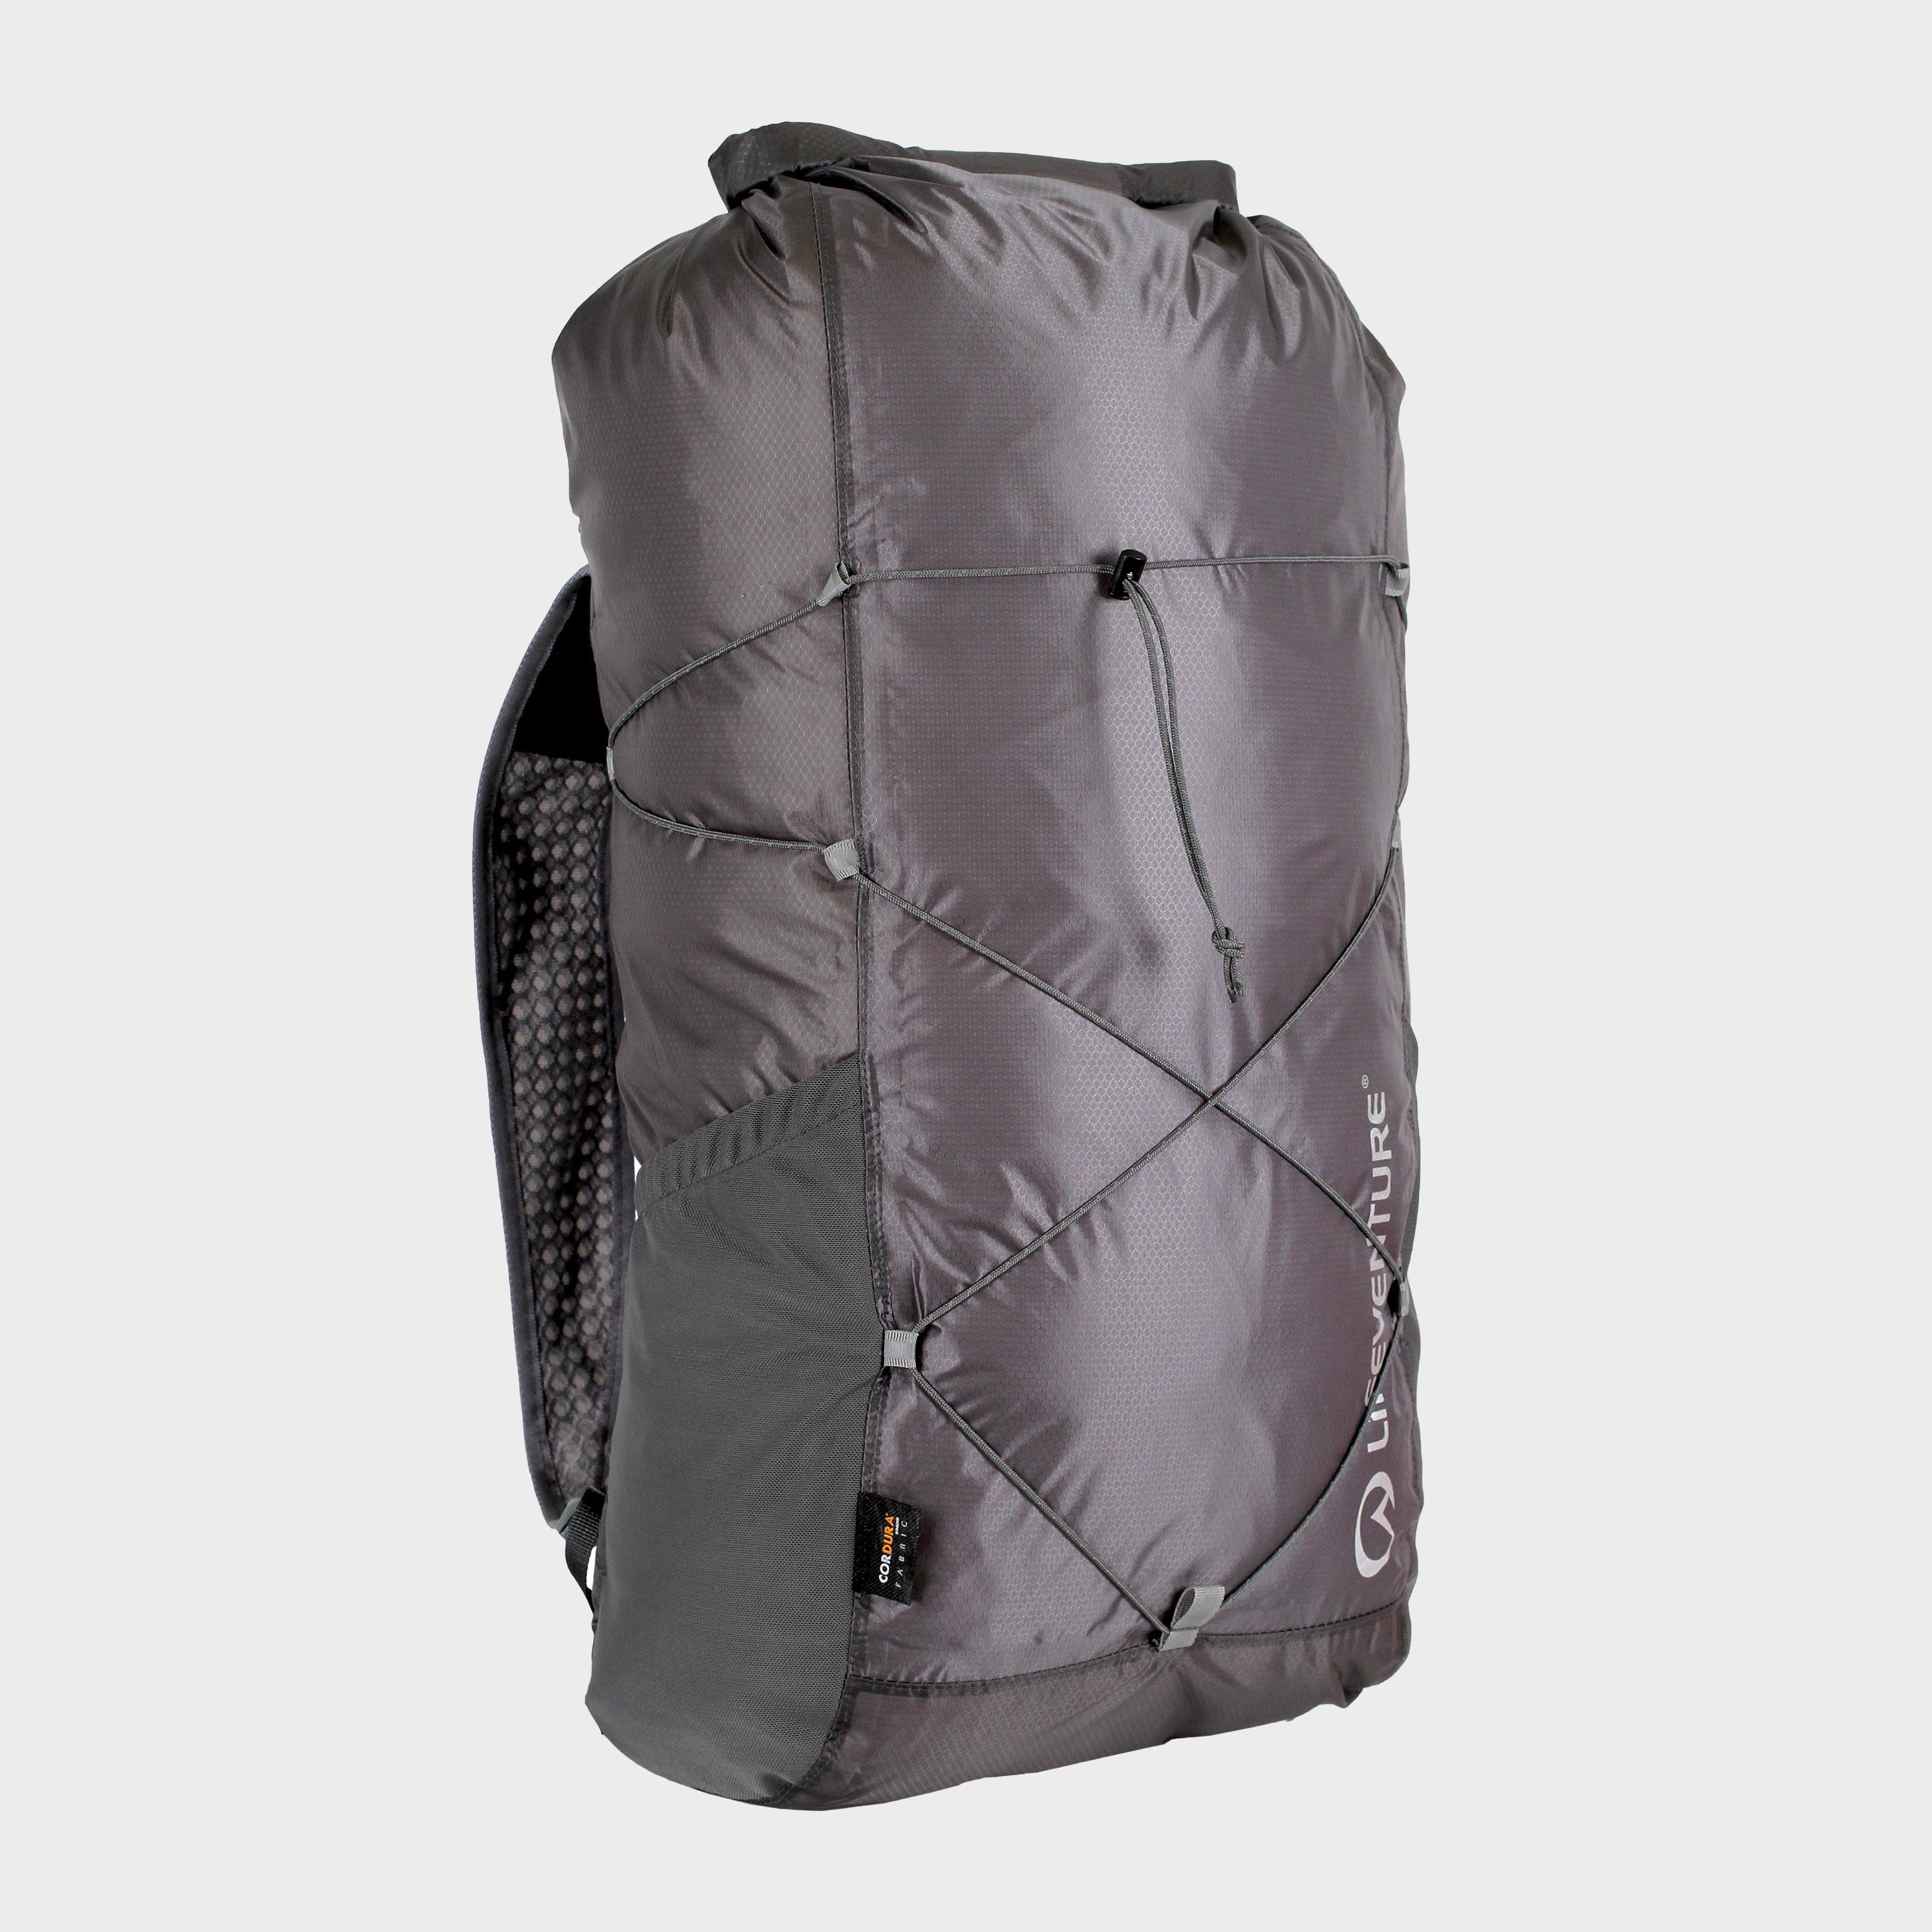 Osprey Transporter Roll-Top Pack Review